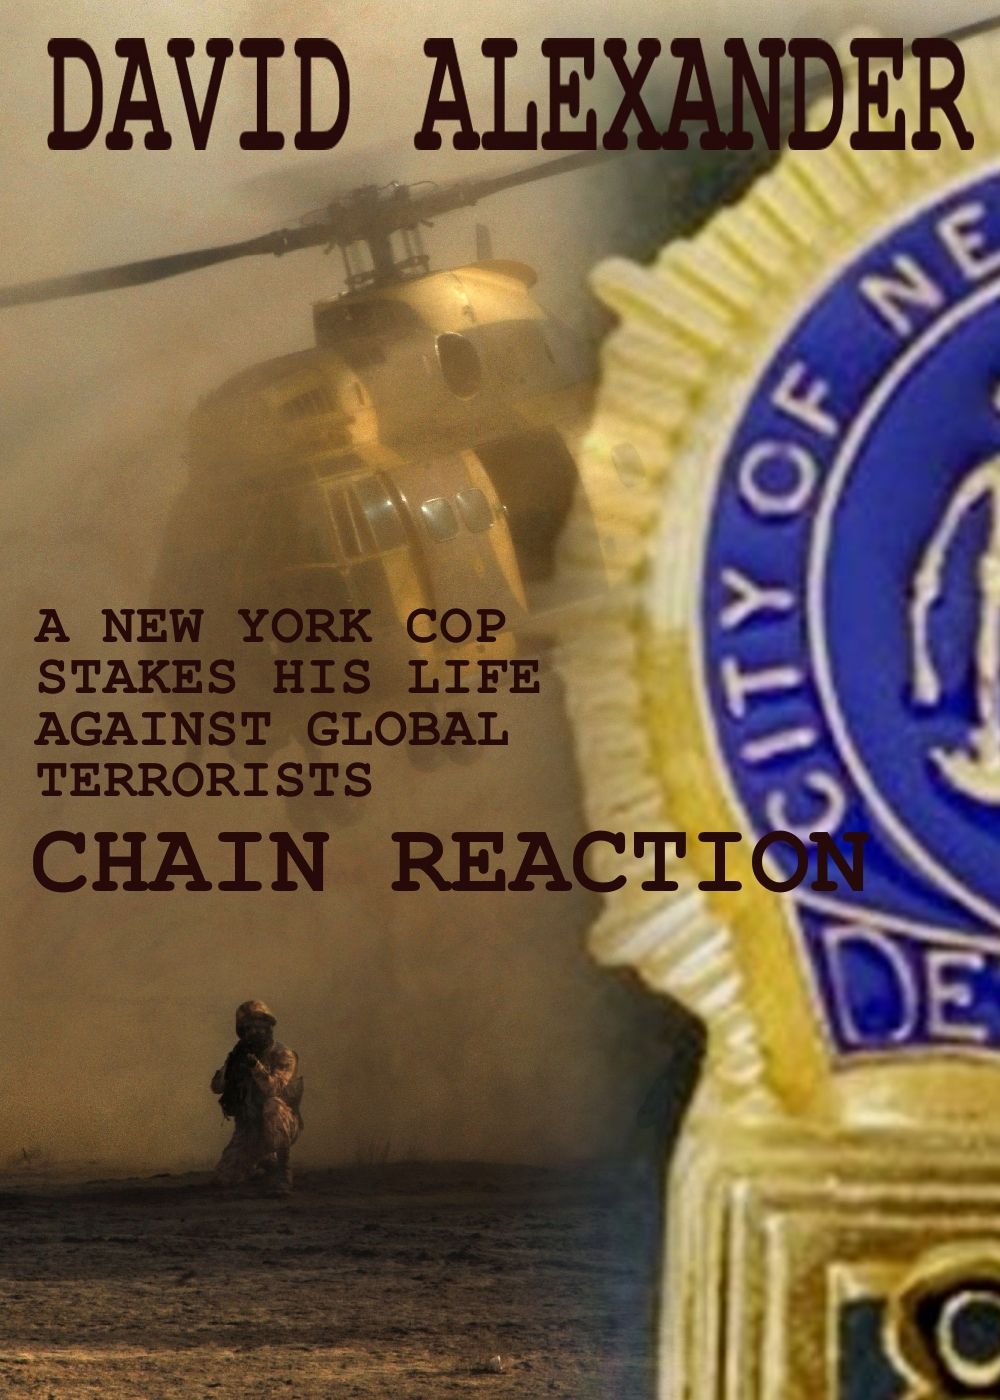 Read Chain Reaction on Kindle